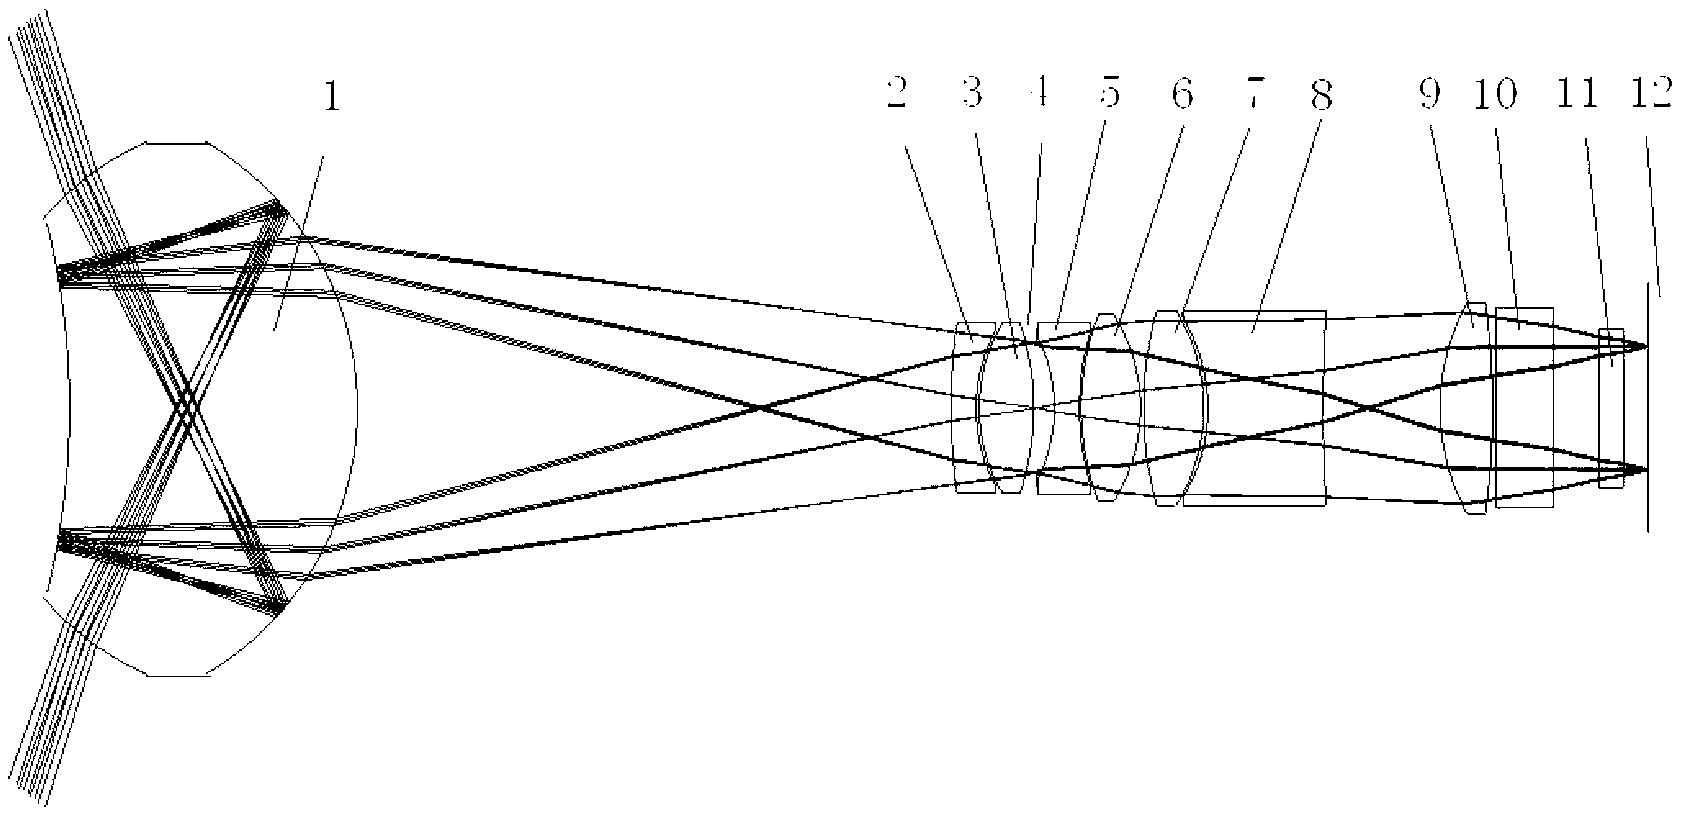 Optical system of ultraviolet multi-band panoramic imaging instrument